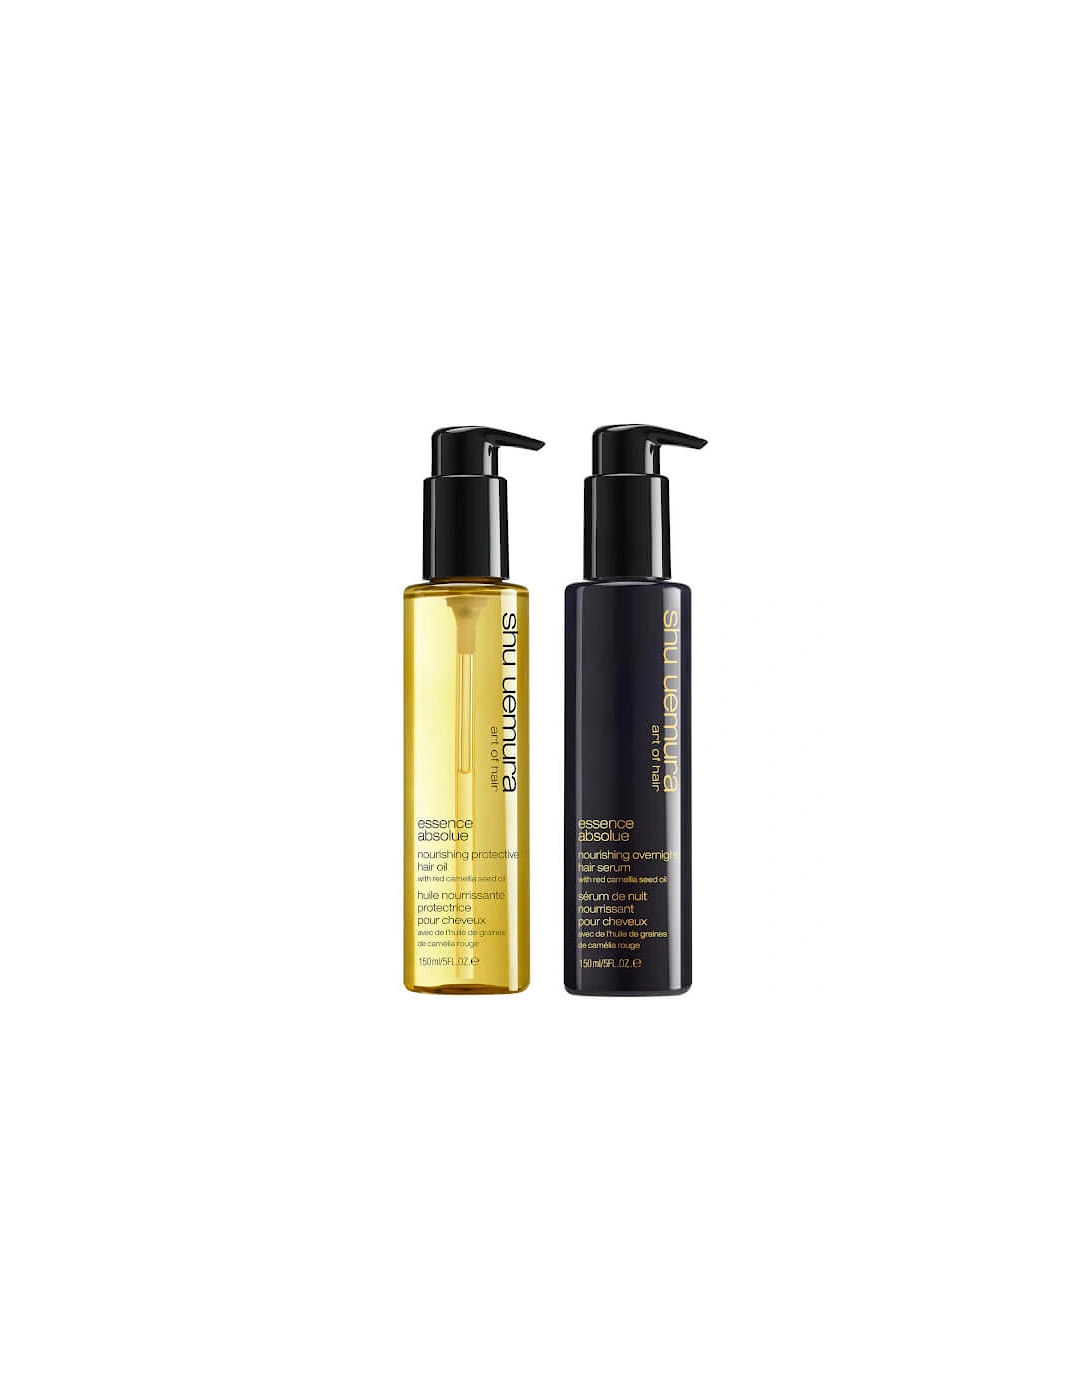 Art of Hair Essence Absolue Oil and Essence Absolue Overnight Serum Duo for Hair Protectection, 2 of 1